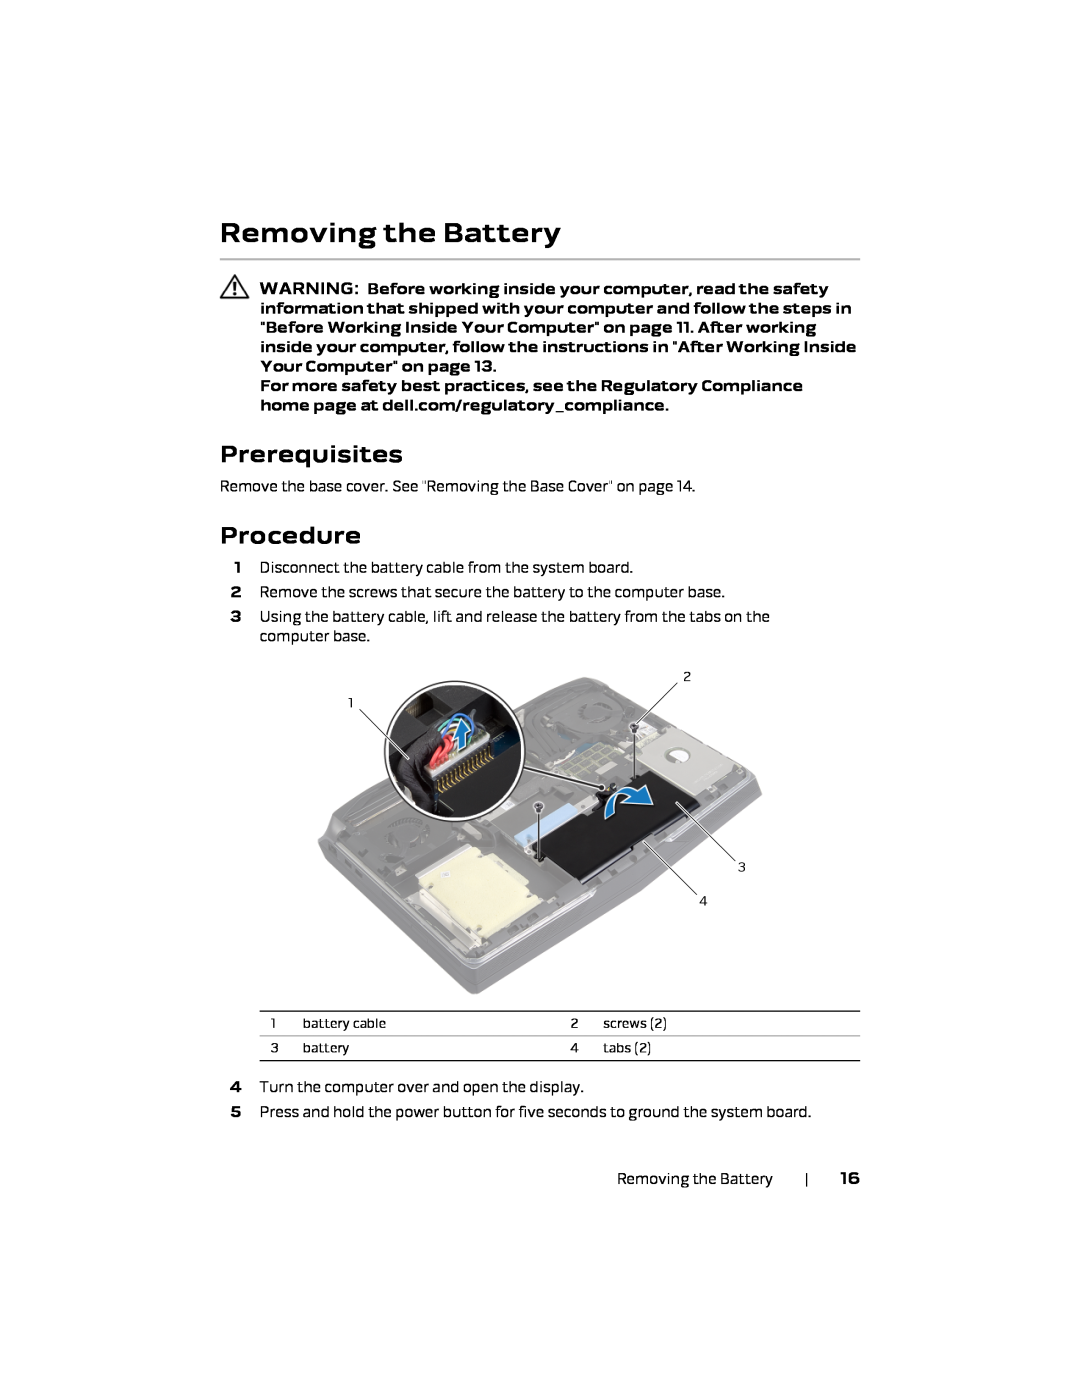 Alienware P18E, 17 R1 owner manual Removing the Battery, Prerequisites, Procedure 